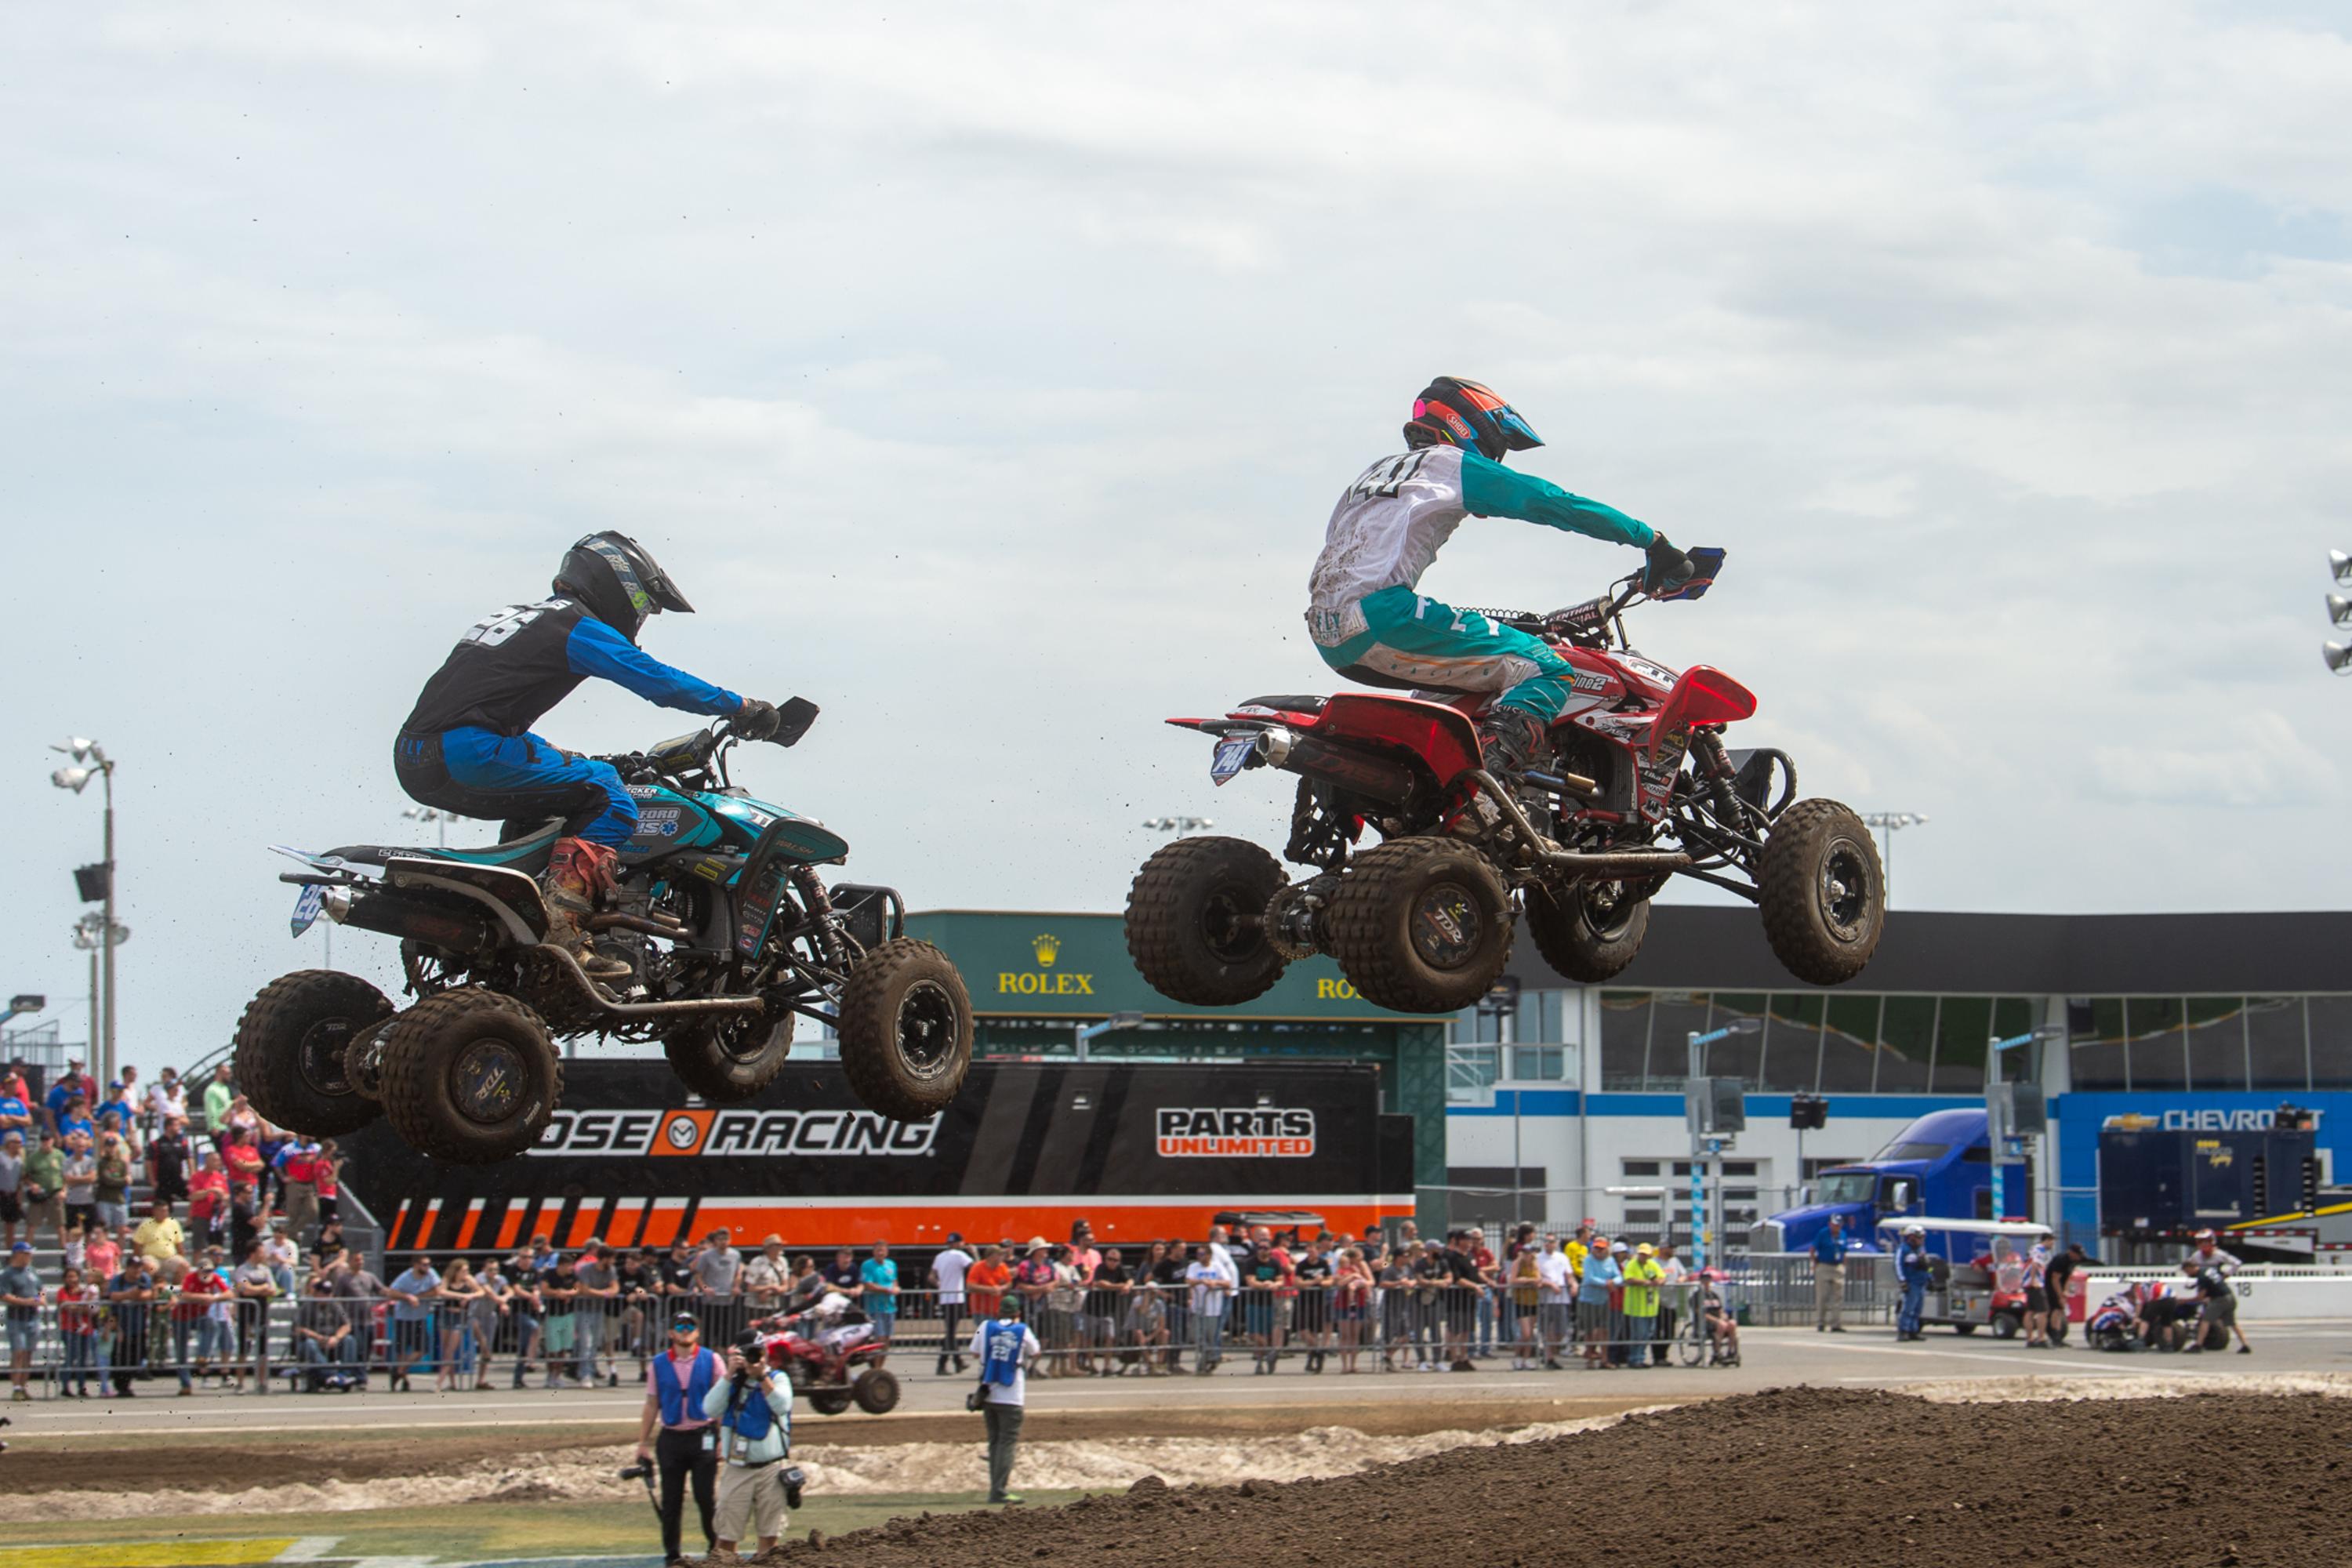 RLT Competition Bulletin 2020-1: All Motorsports Activities Postponed Thru Easter